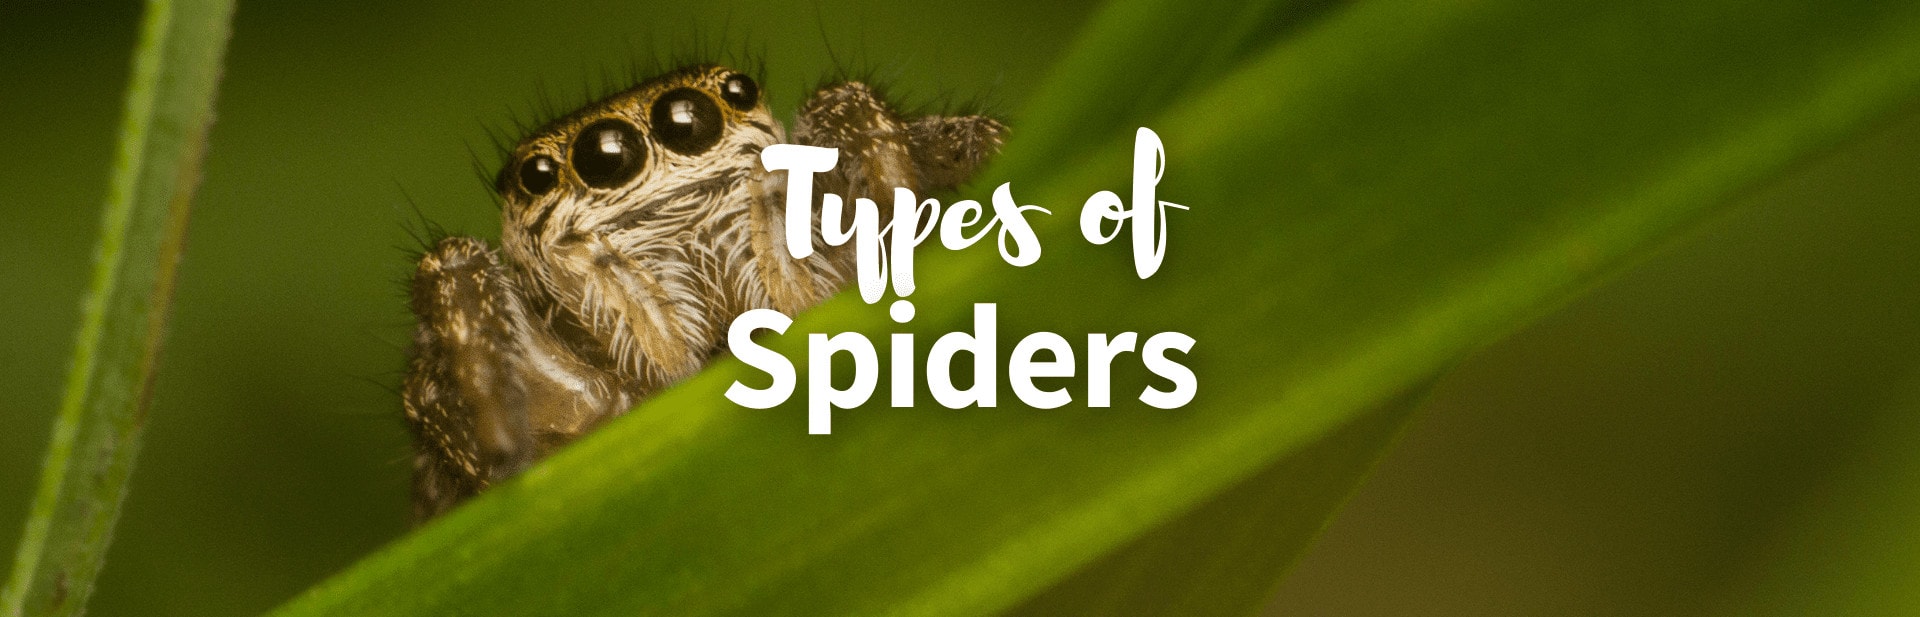 All 21 Types of Spiders: Identification Guide with Pictures + Facts